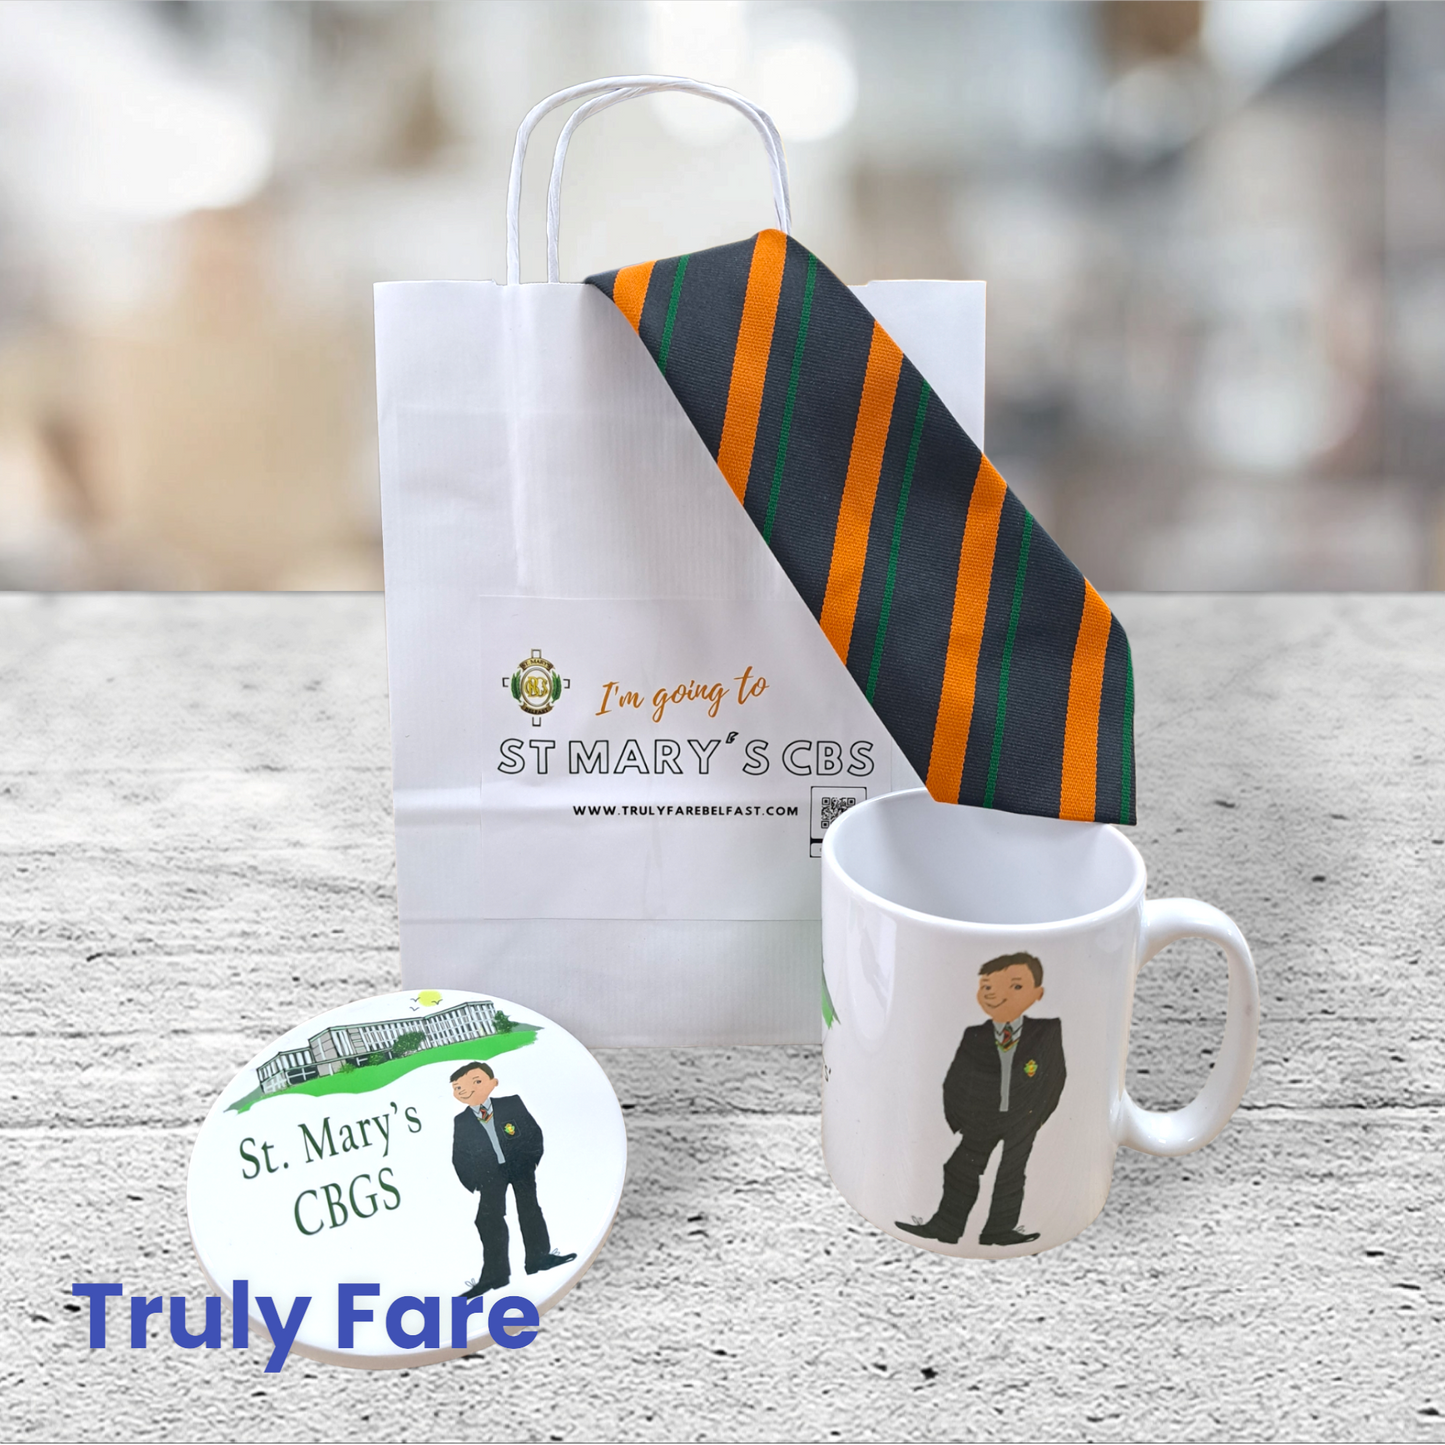 St Mary's coaster, tie, cup and gift bag set